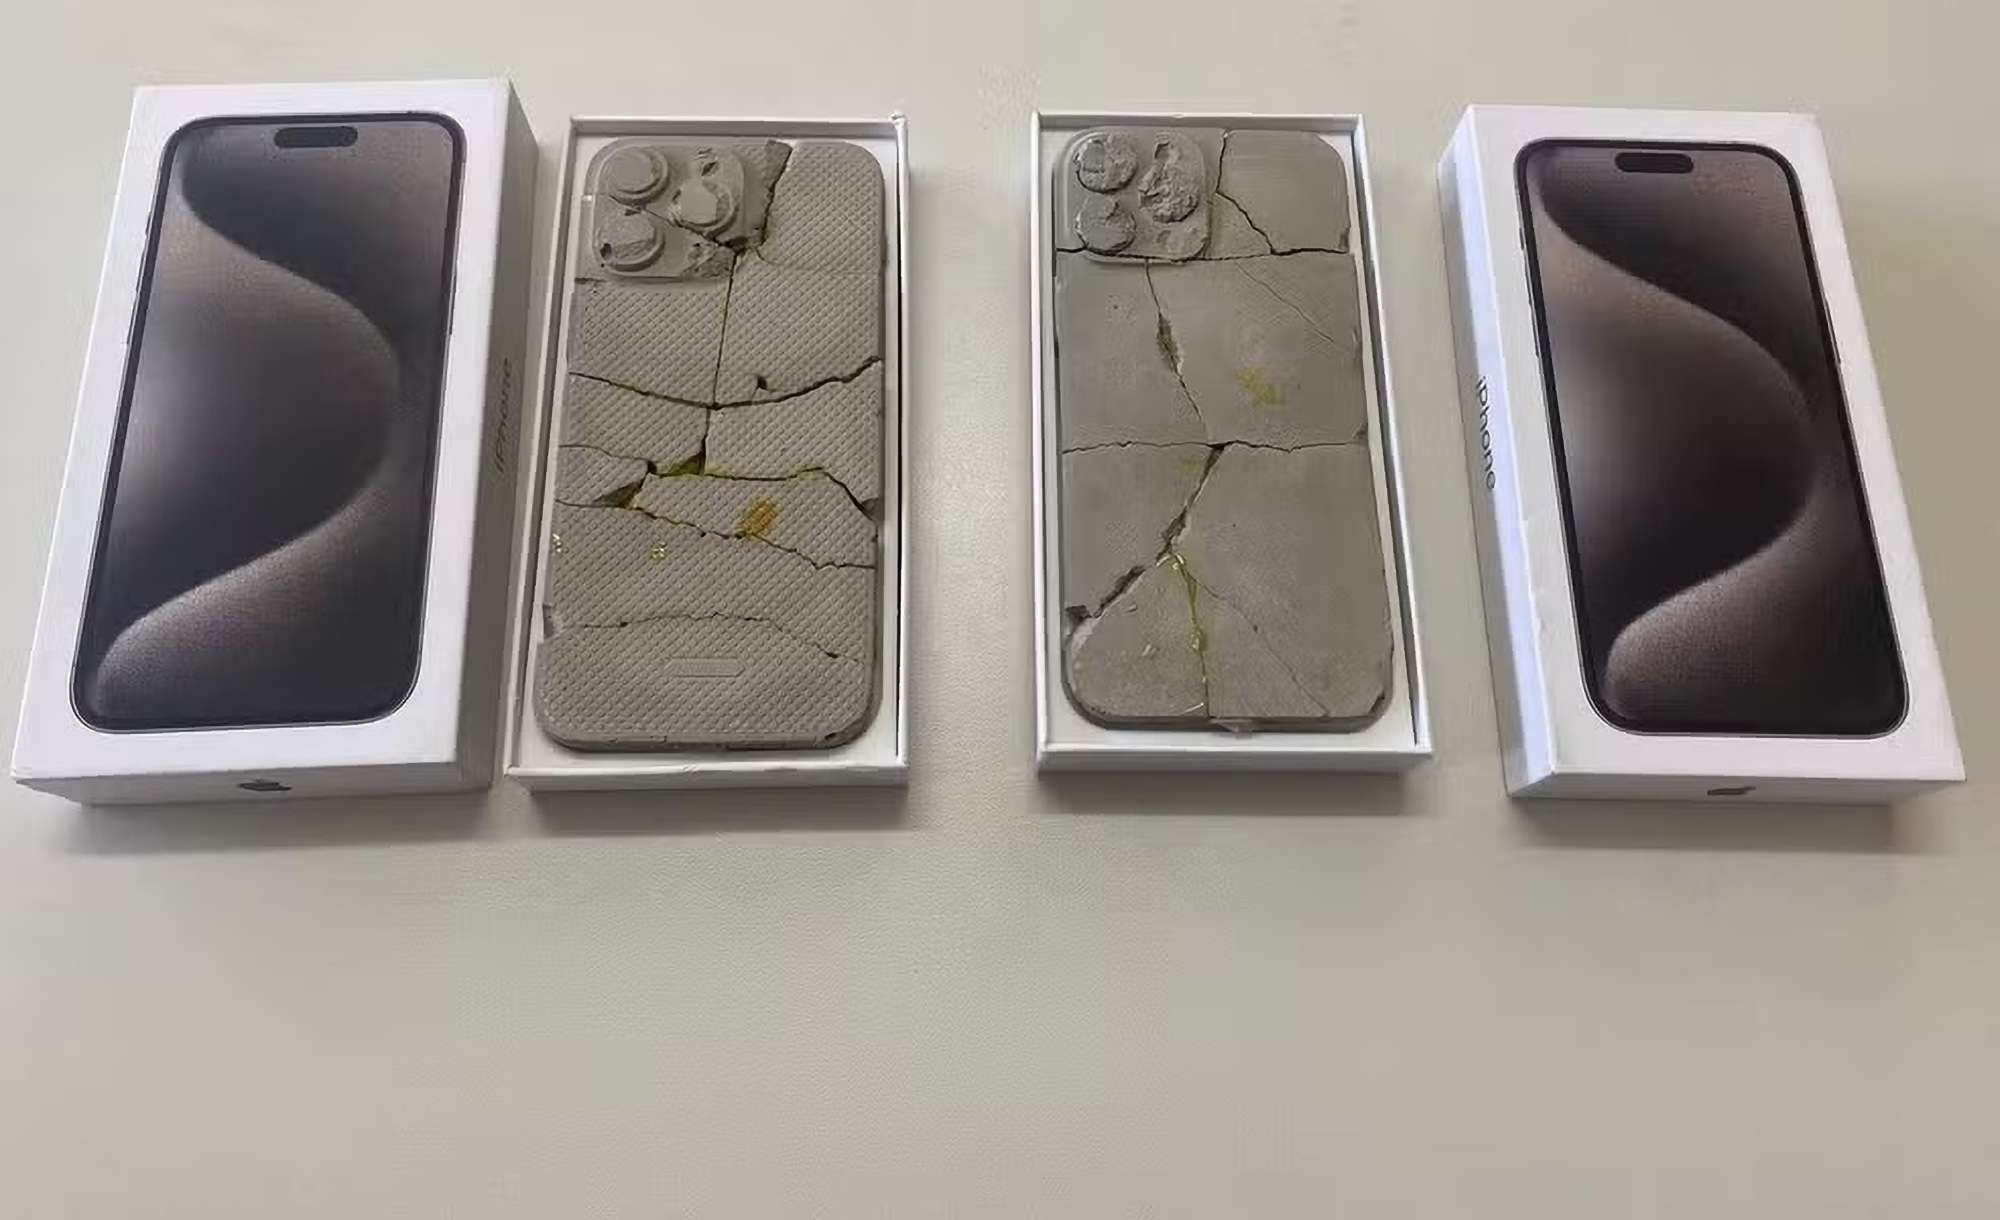 Read more about the article Influencer Sold Fake iPhones Made Of Mud For GBP 2,000